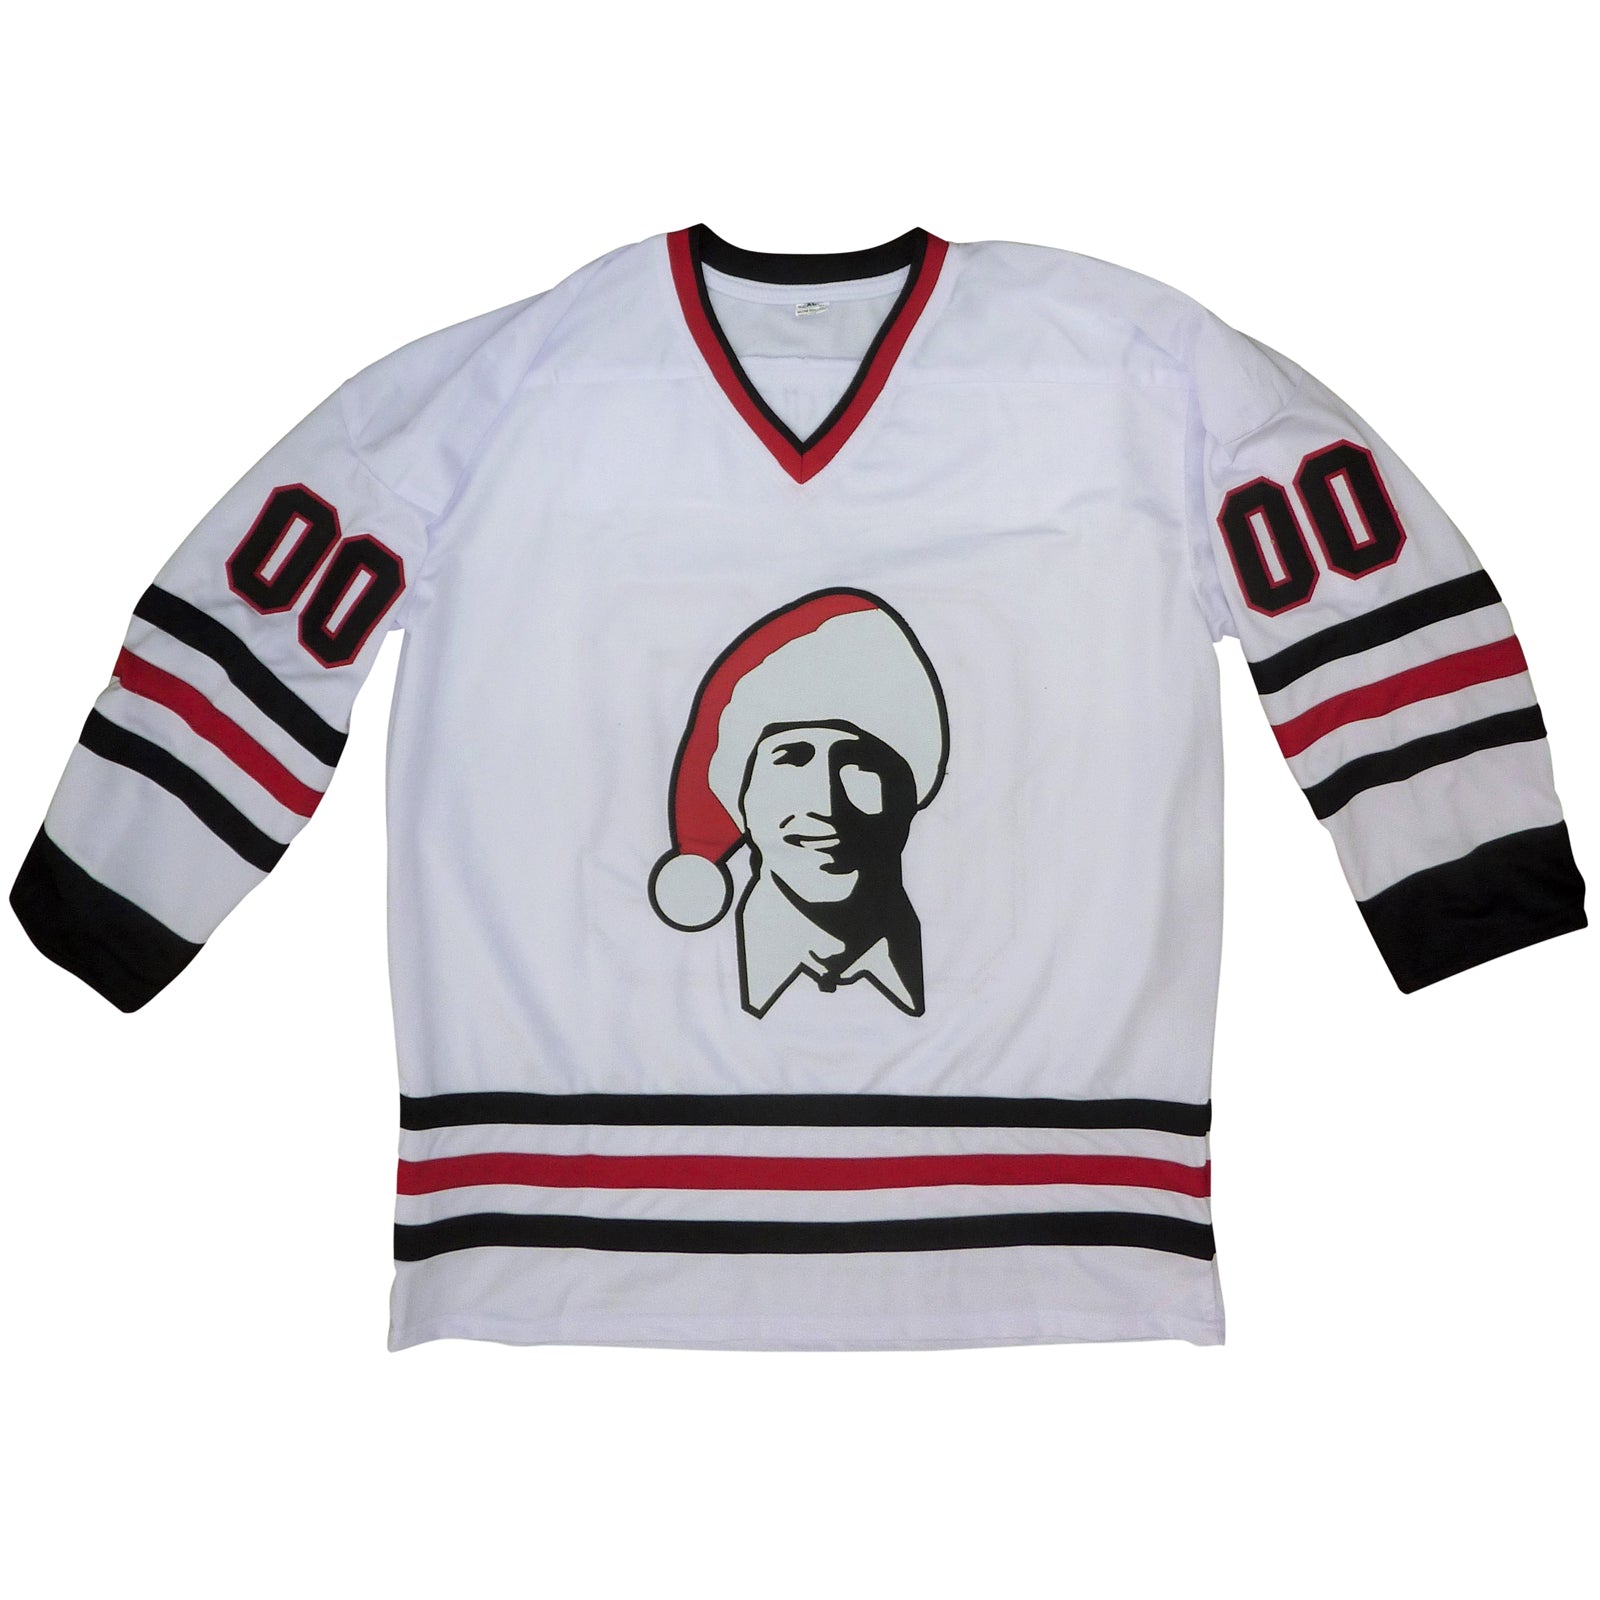 Chevy Chase Autographed Clark Griswold Custom Hockey Jersey - BAS COA